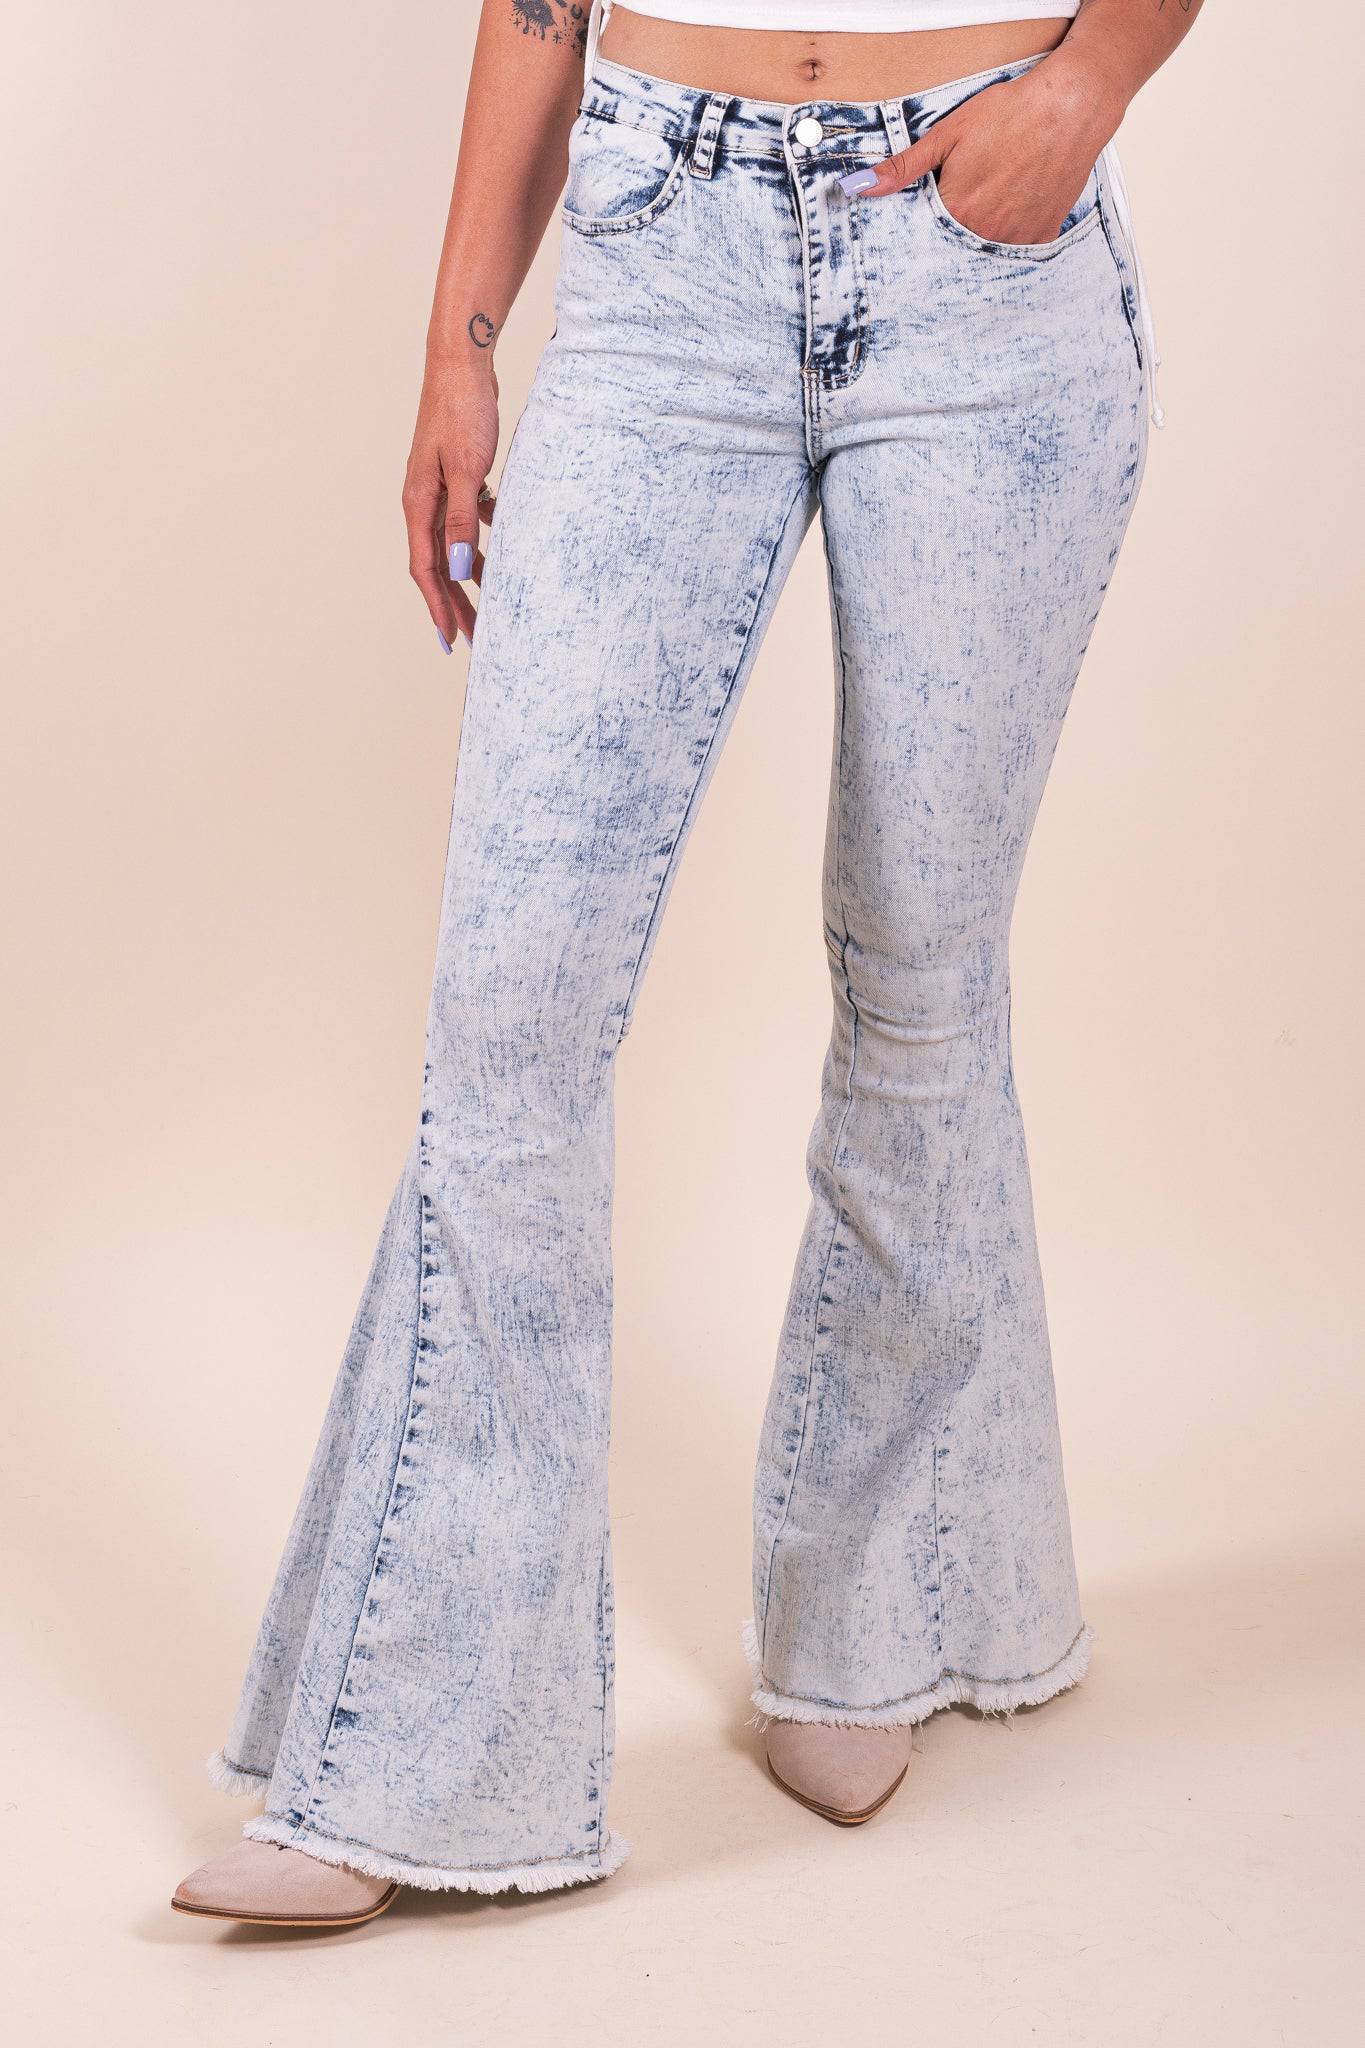 Shop for Latest Flare Jeans for Women Online Starting @ ₹999